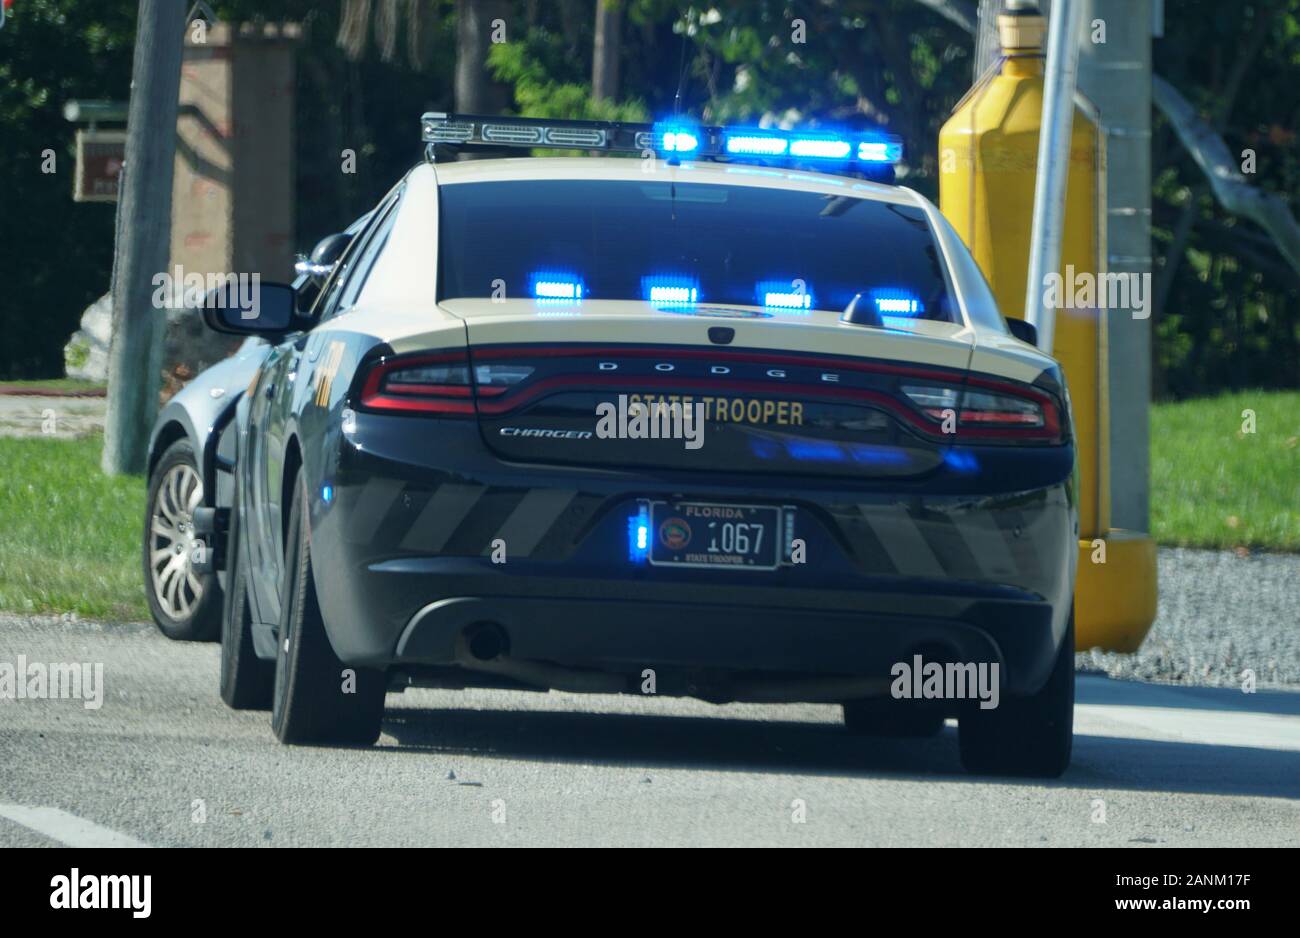 Miami, FL, U.S.A - January 3, 2020 - The Florida State Trooper stopping a driver on the highway Stock Photo